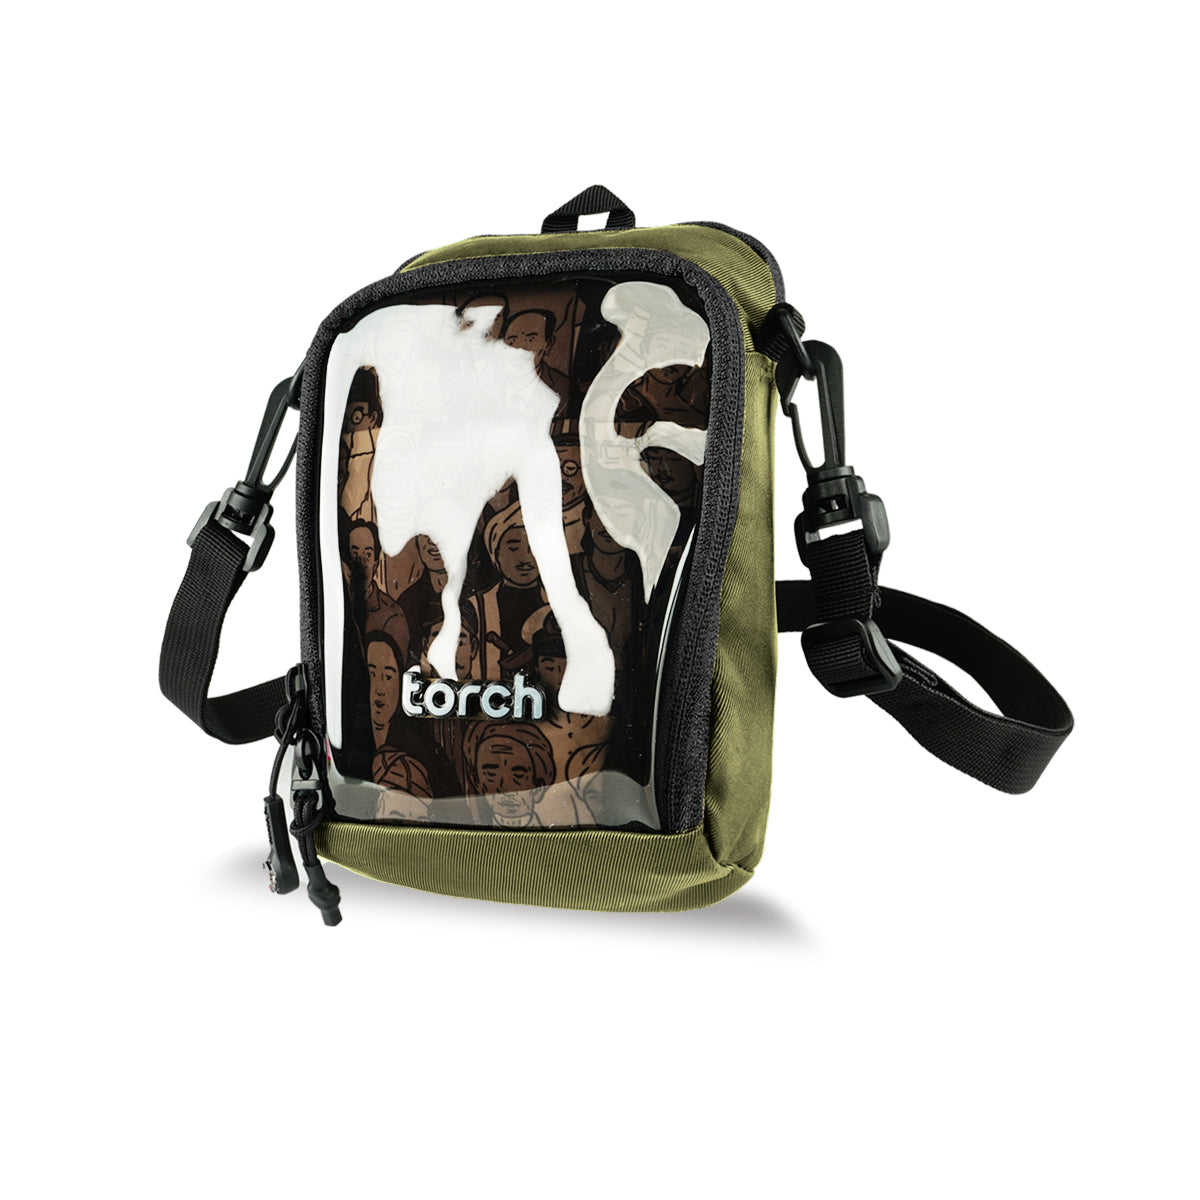 Juang Travel Pouch